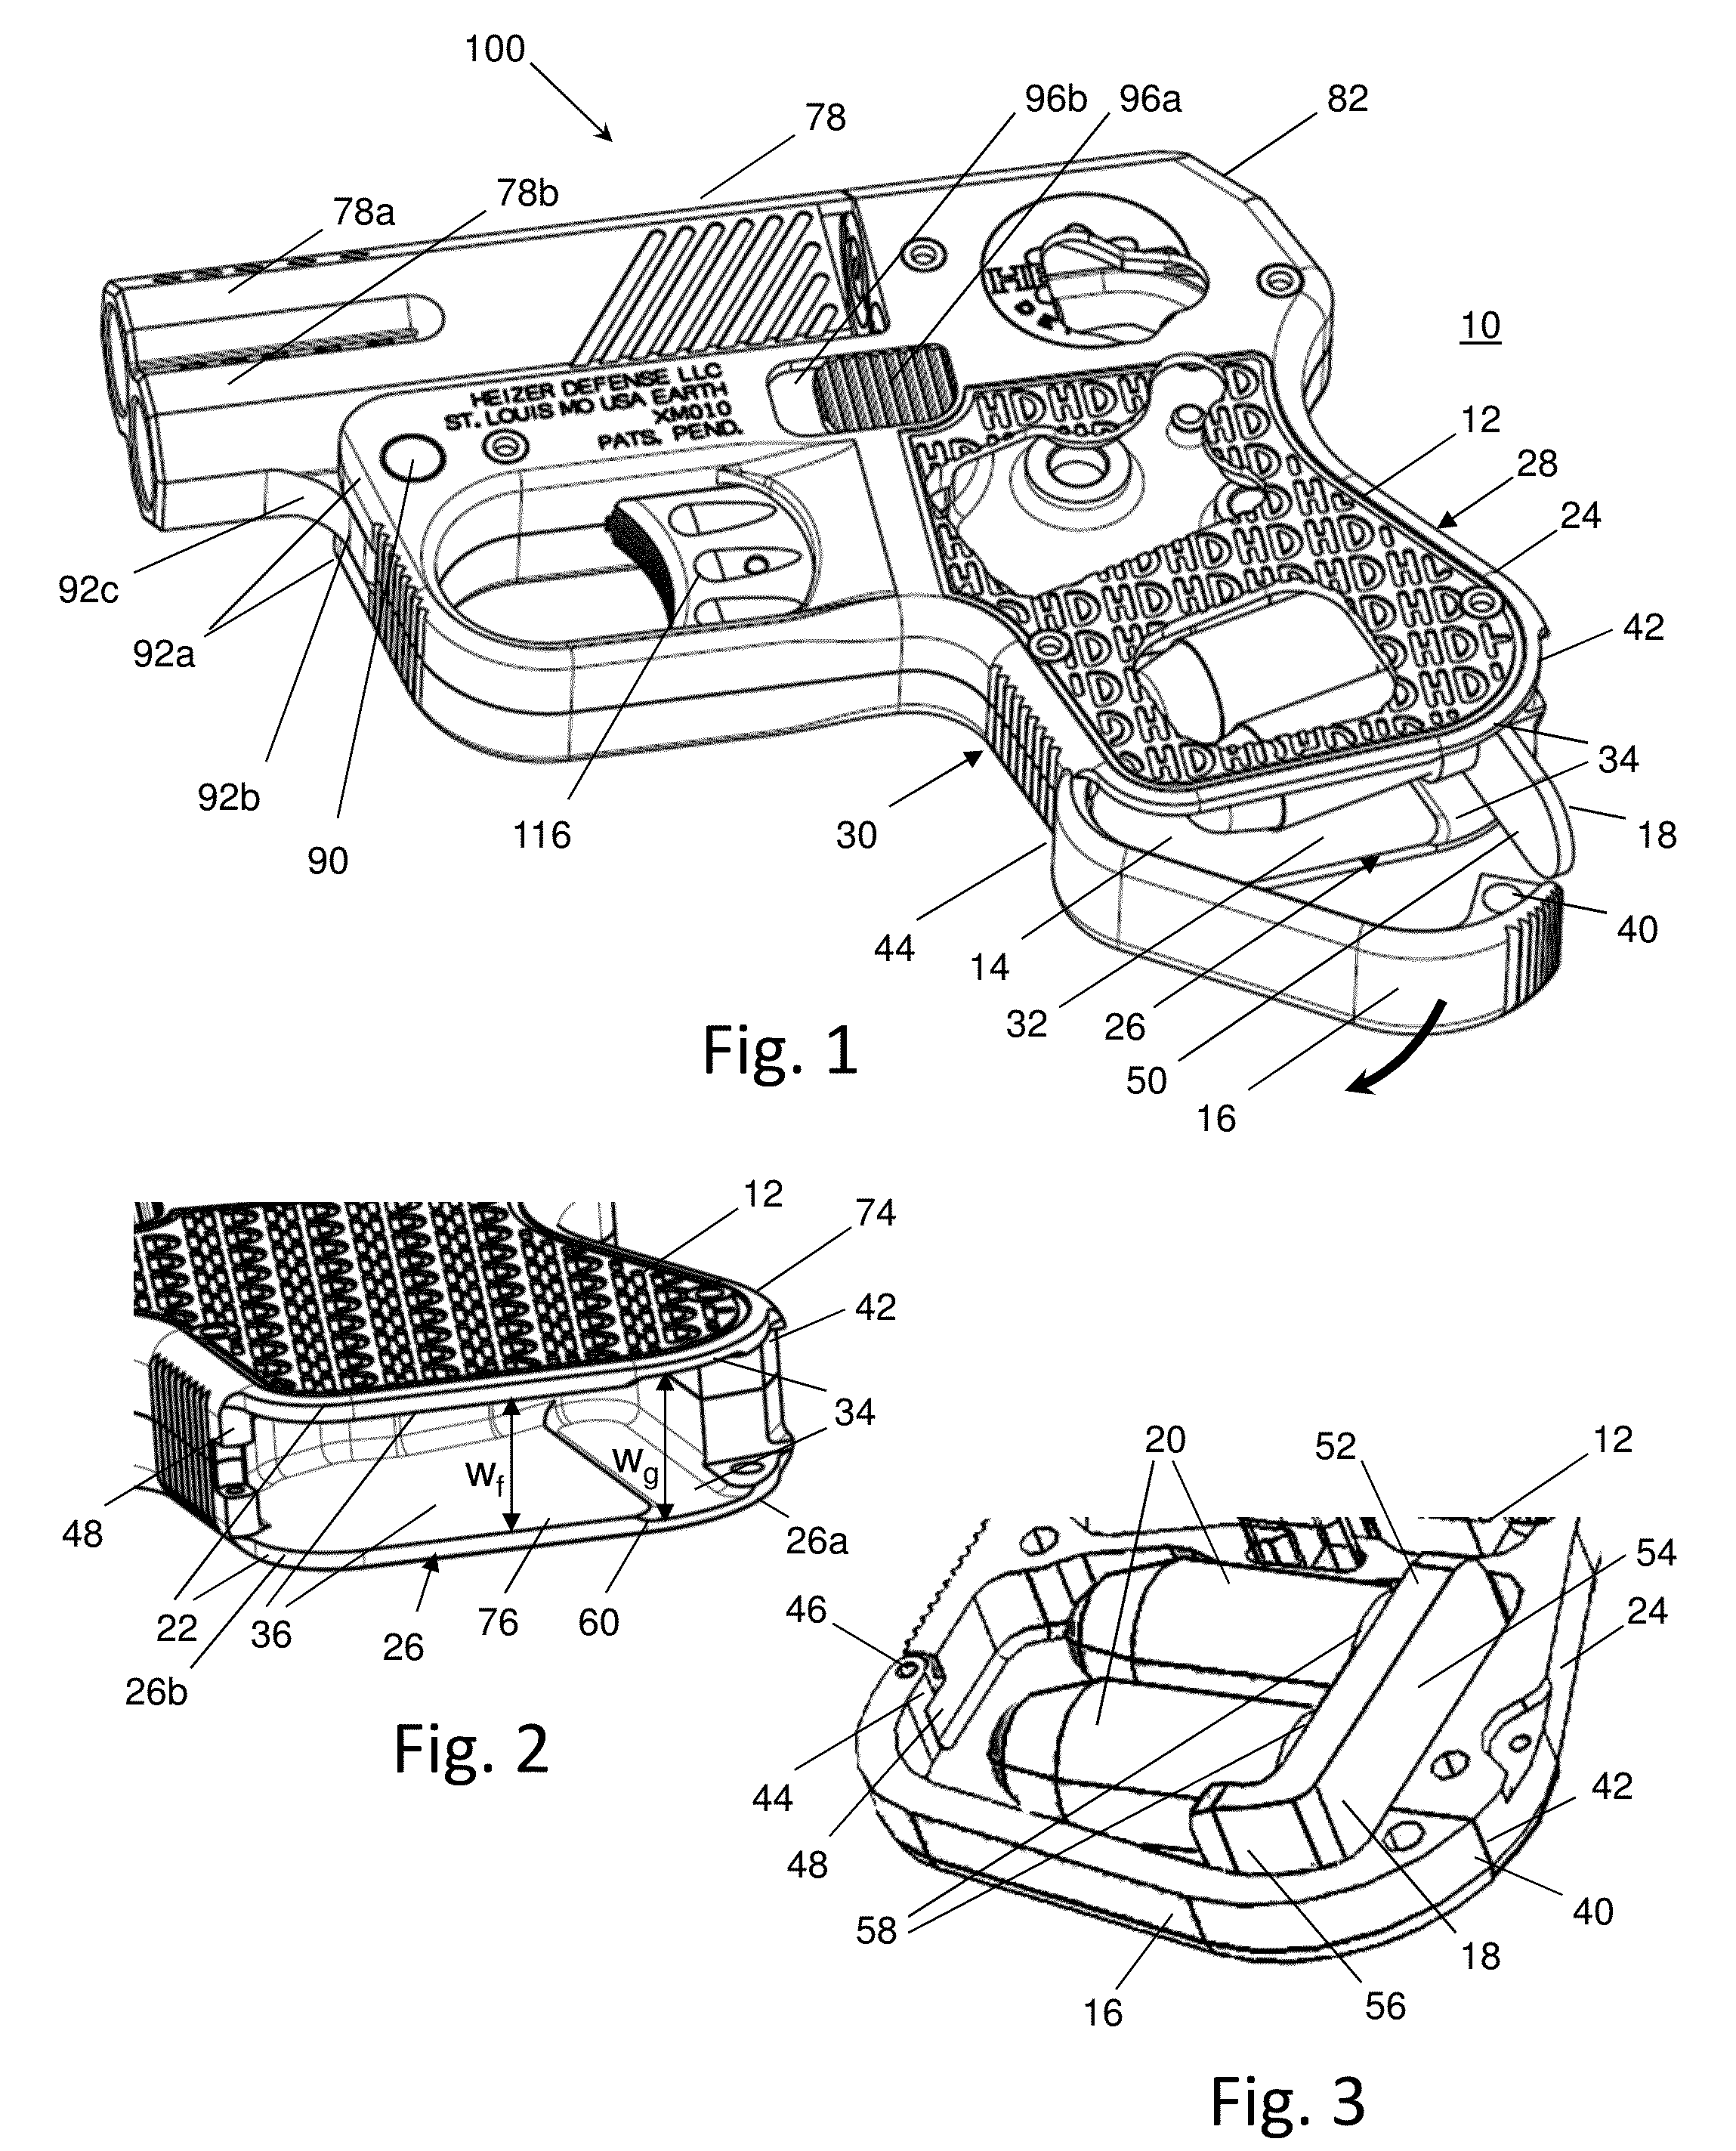 Firearm having ammunition compartment with H-clip and quick-change barrel with variable diameter bore and optional takedown pin